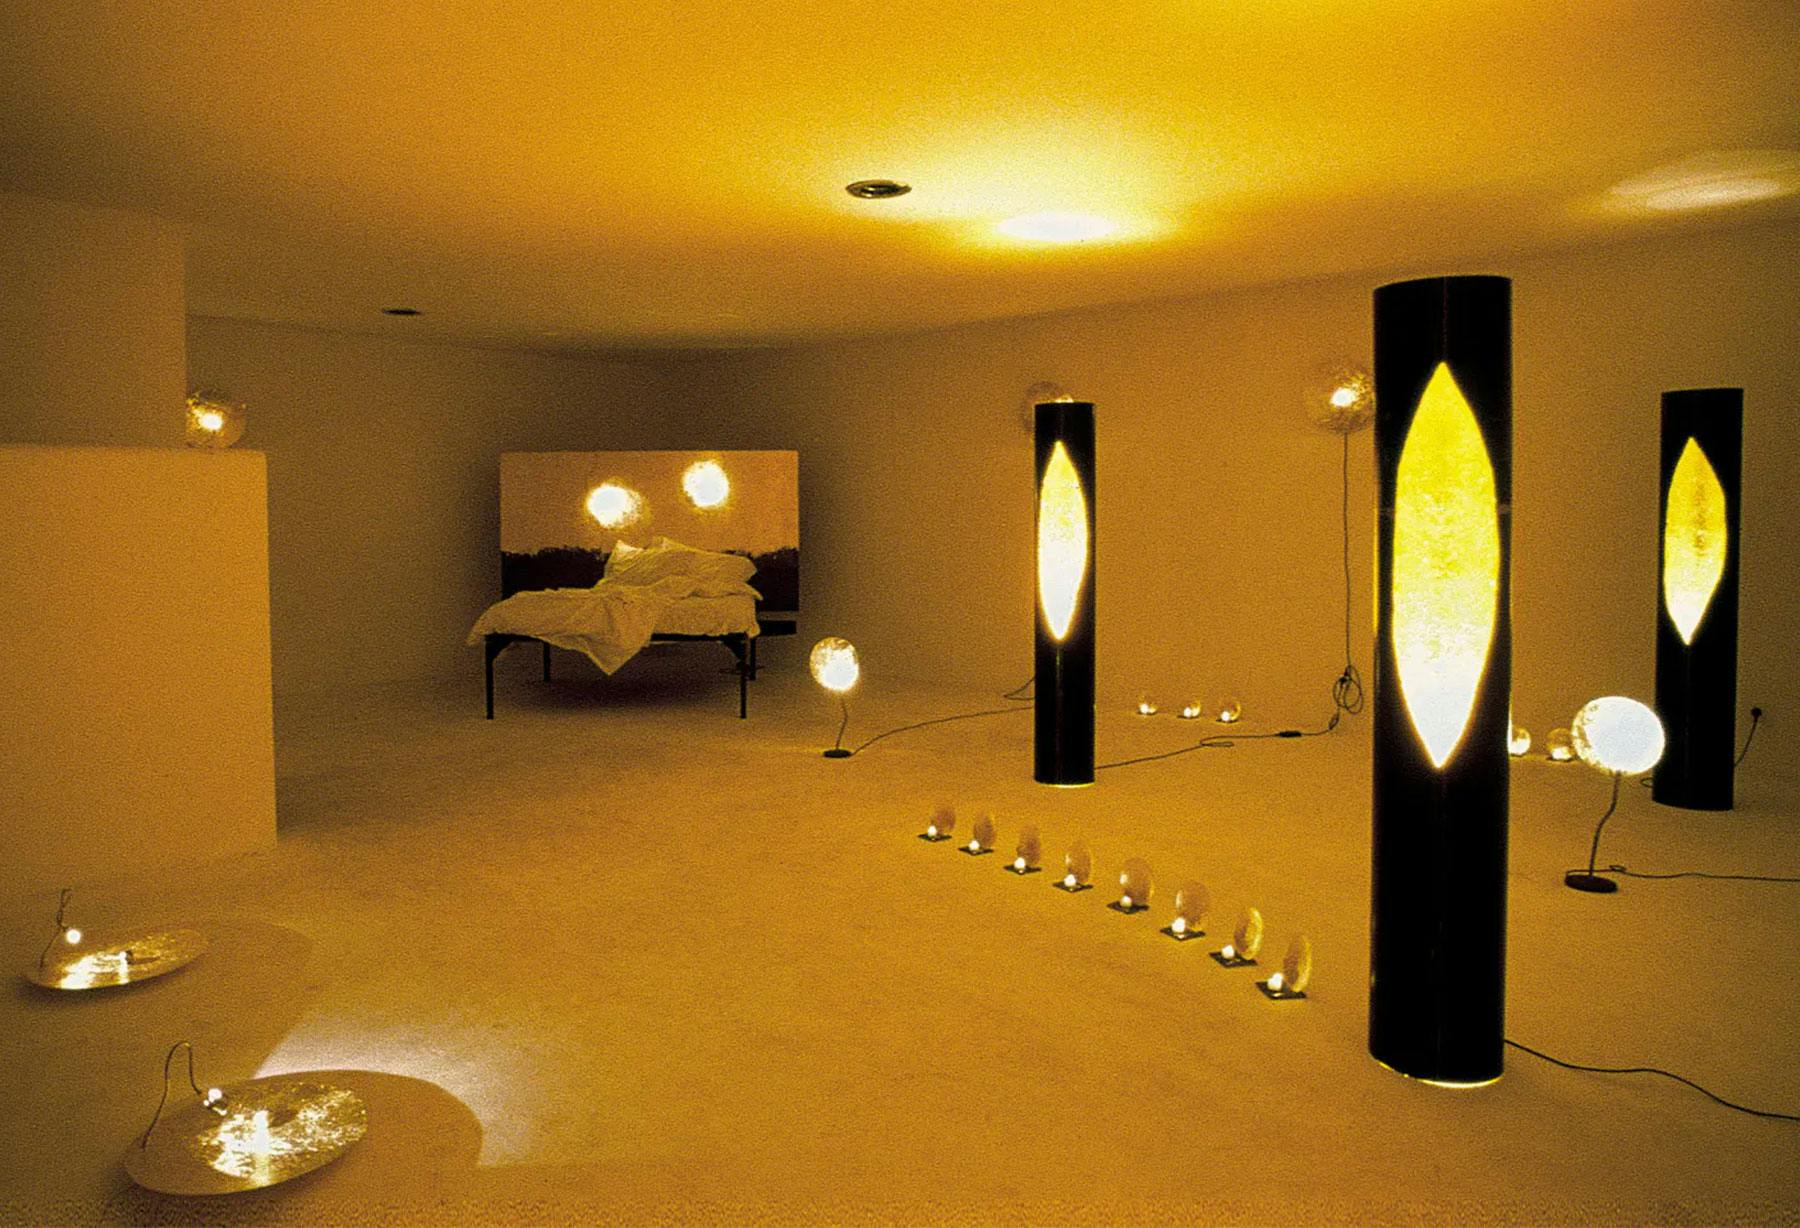 <p>Luci d’Oro installation for Dilmos show-room in Milan, with rough iron colums lined internally with gold coloured leaf. The limited edition of the “Sogni d’Oro” (“golden dreams”) bed is presented to the public; one of them was purchased by the artist Claudio Baglioni.</p>
